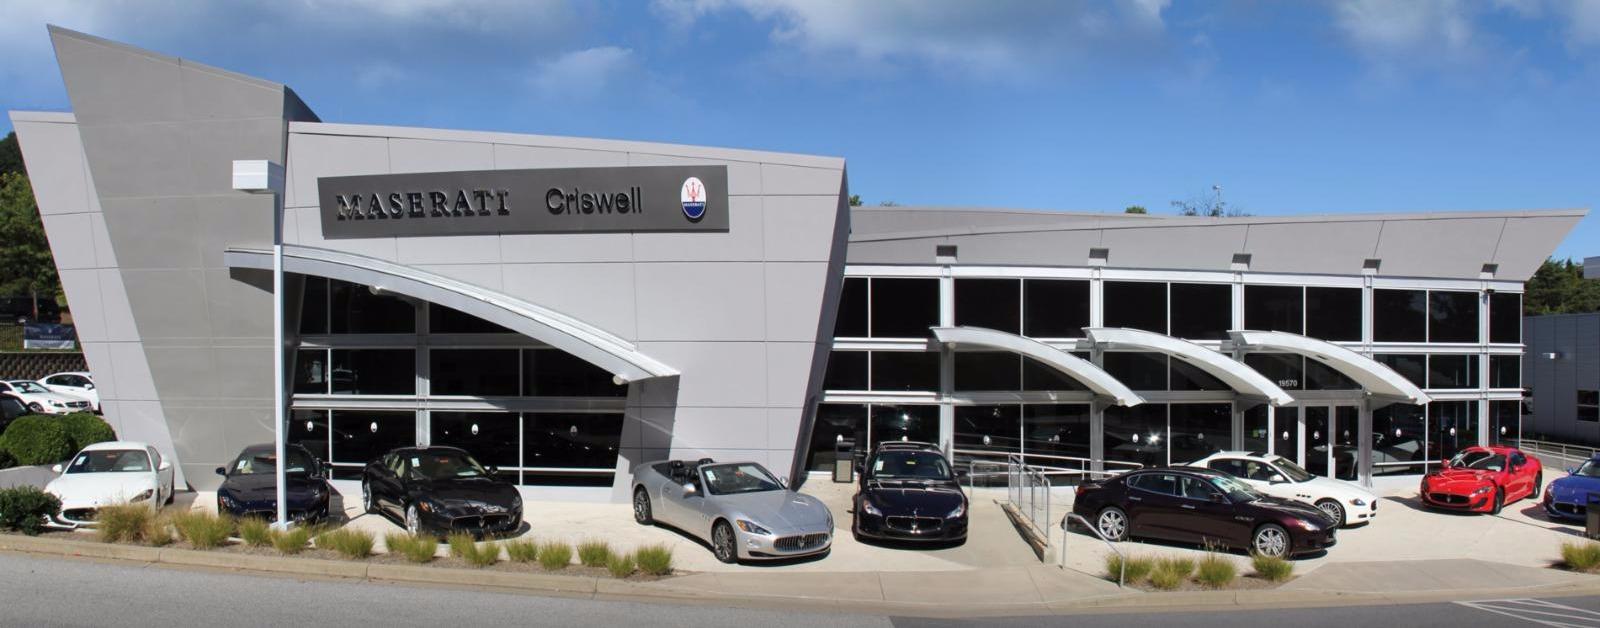 Criswell Automotive Photo